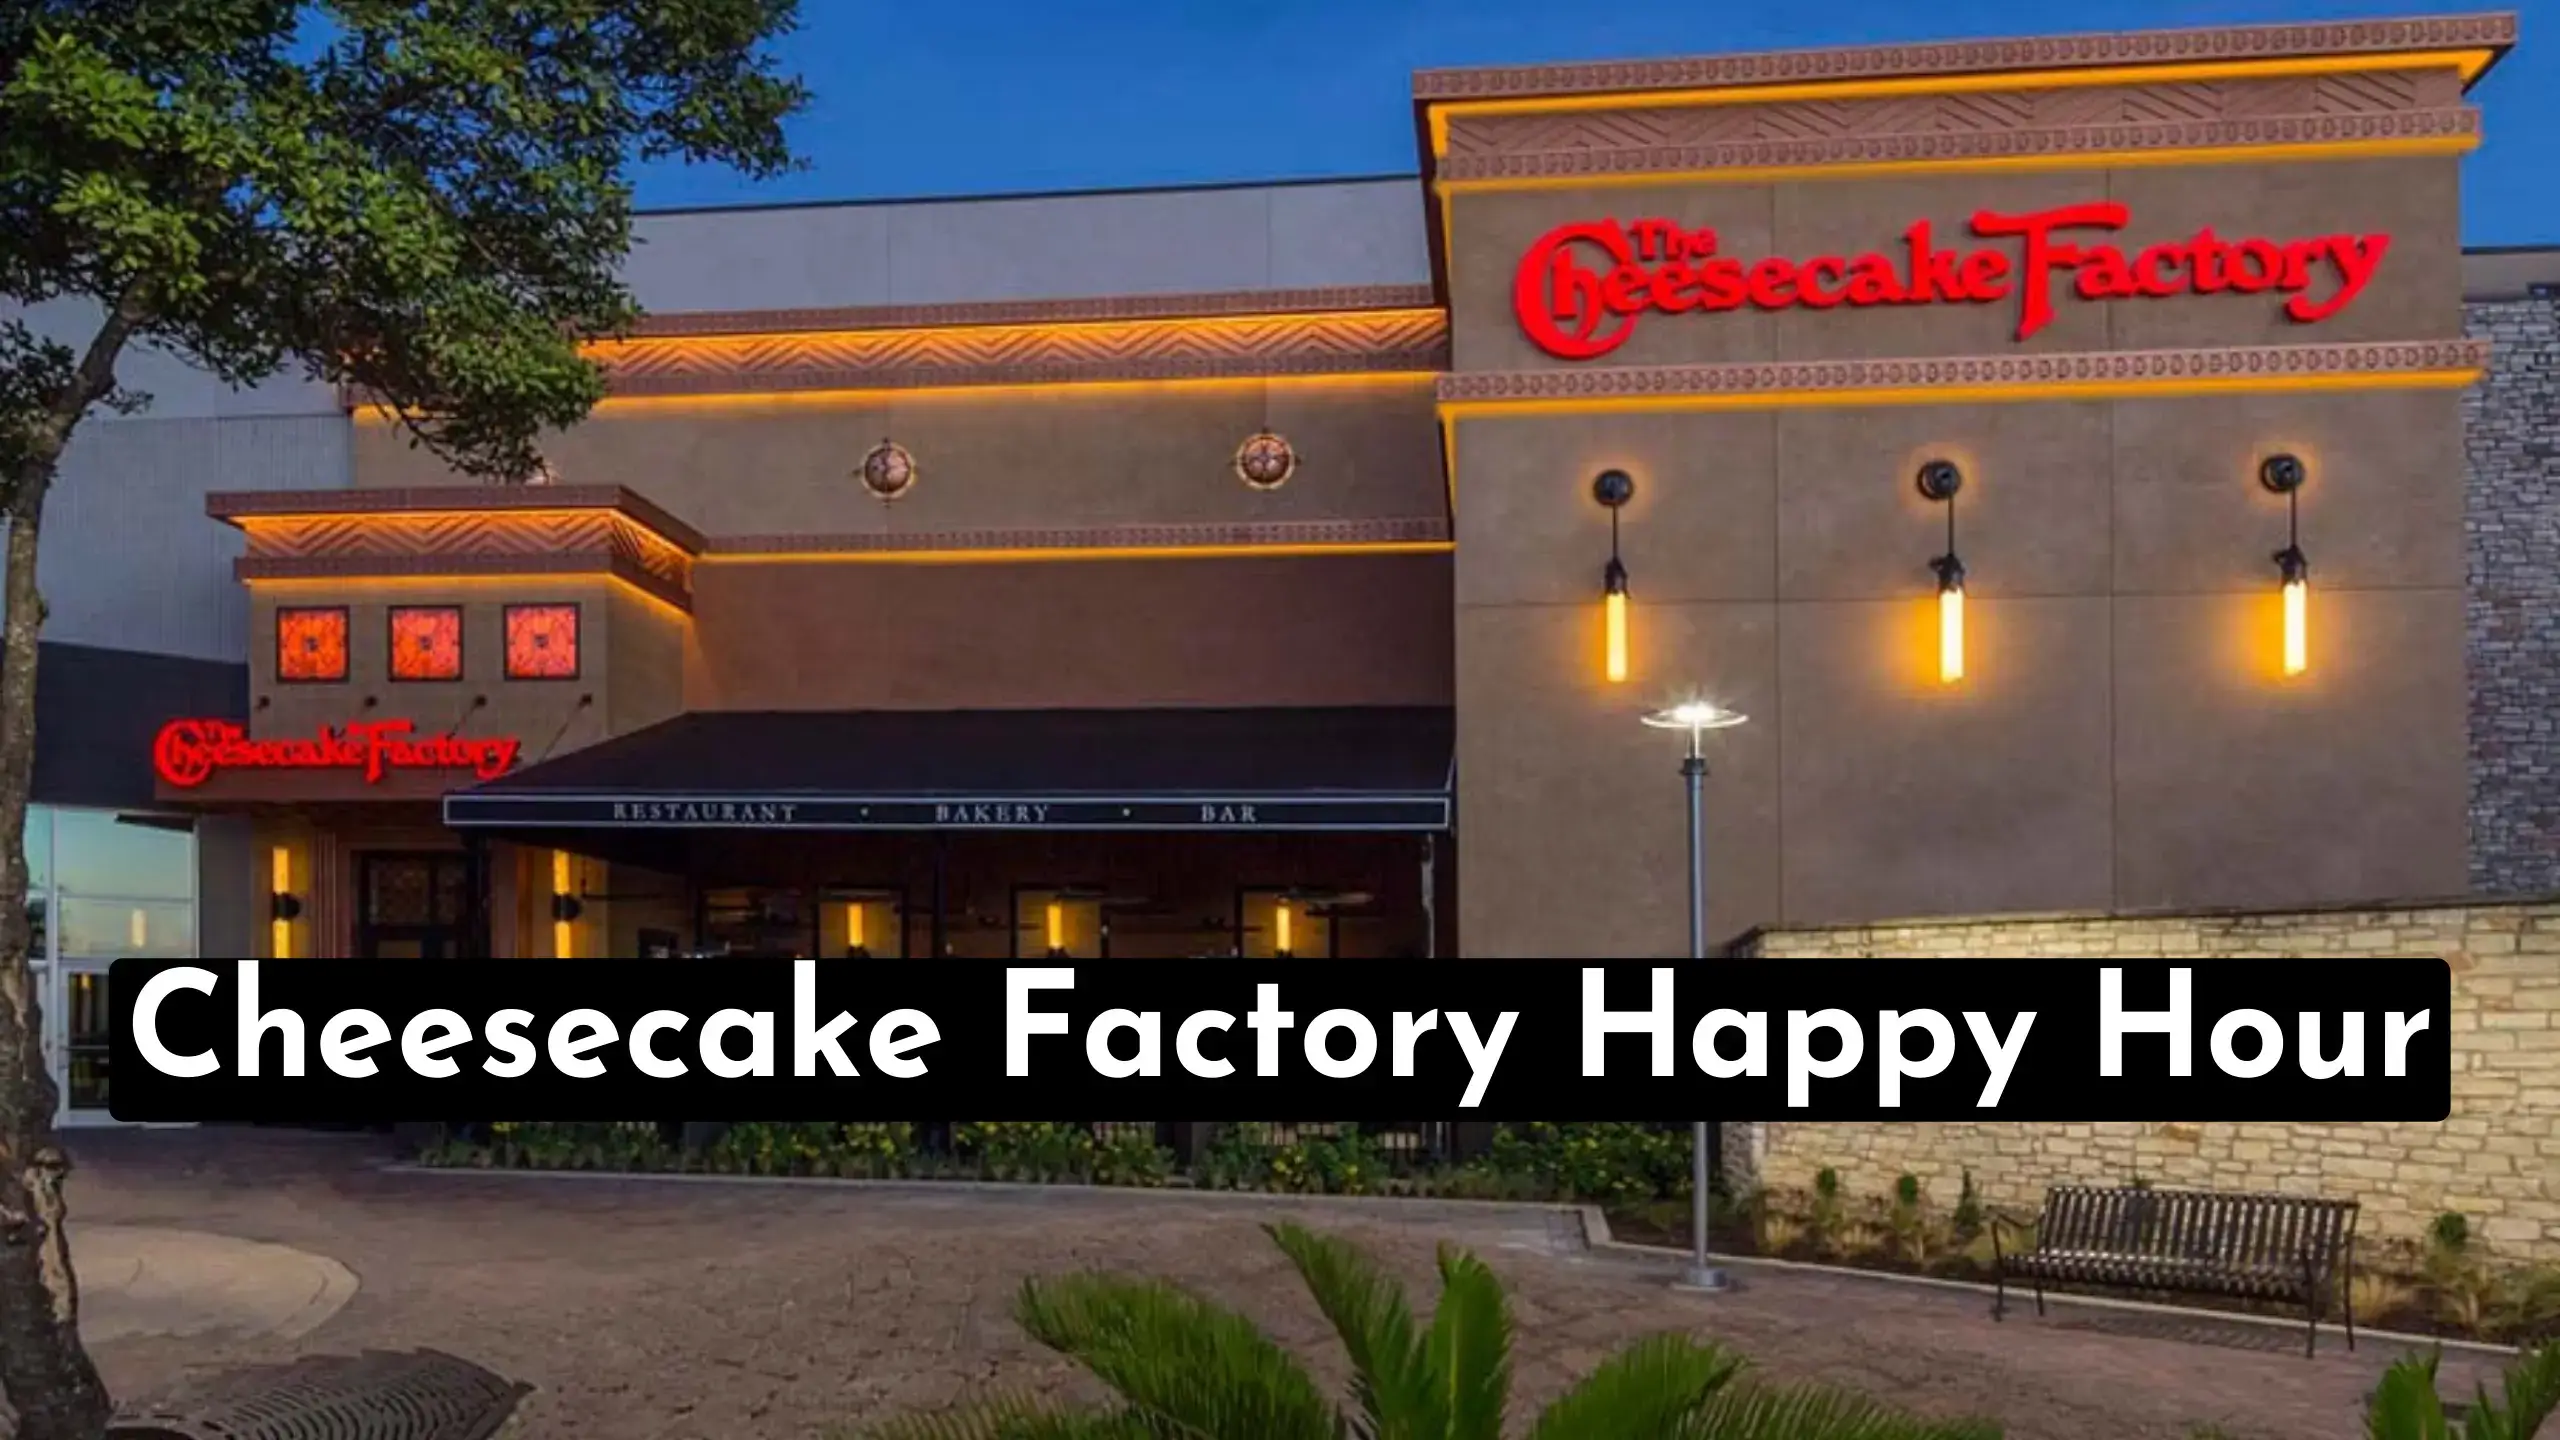 Unwind With Cheesecake Factory Happy Hour - Discounted Drinks, Delicious Bites And Heavenly Cheesecakes. Cheers To Happiness!| store-hour.com